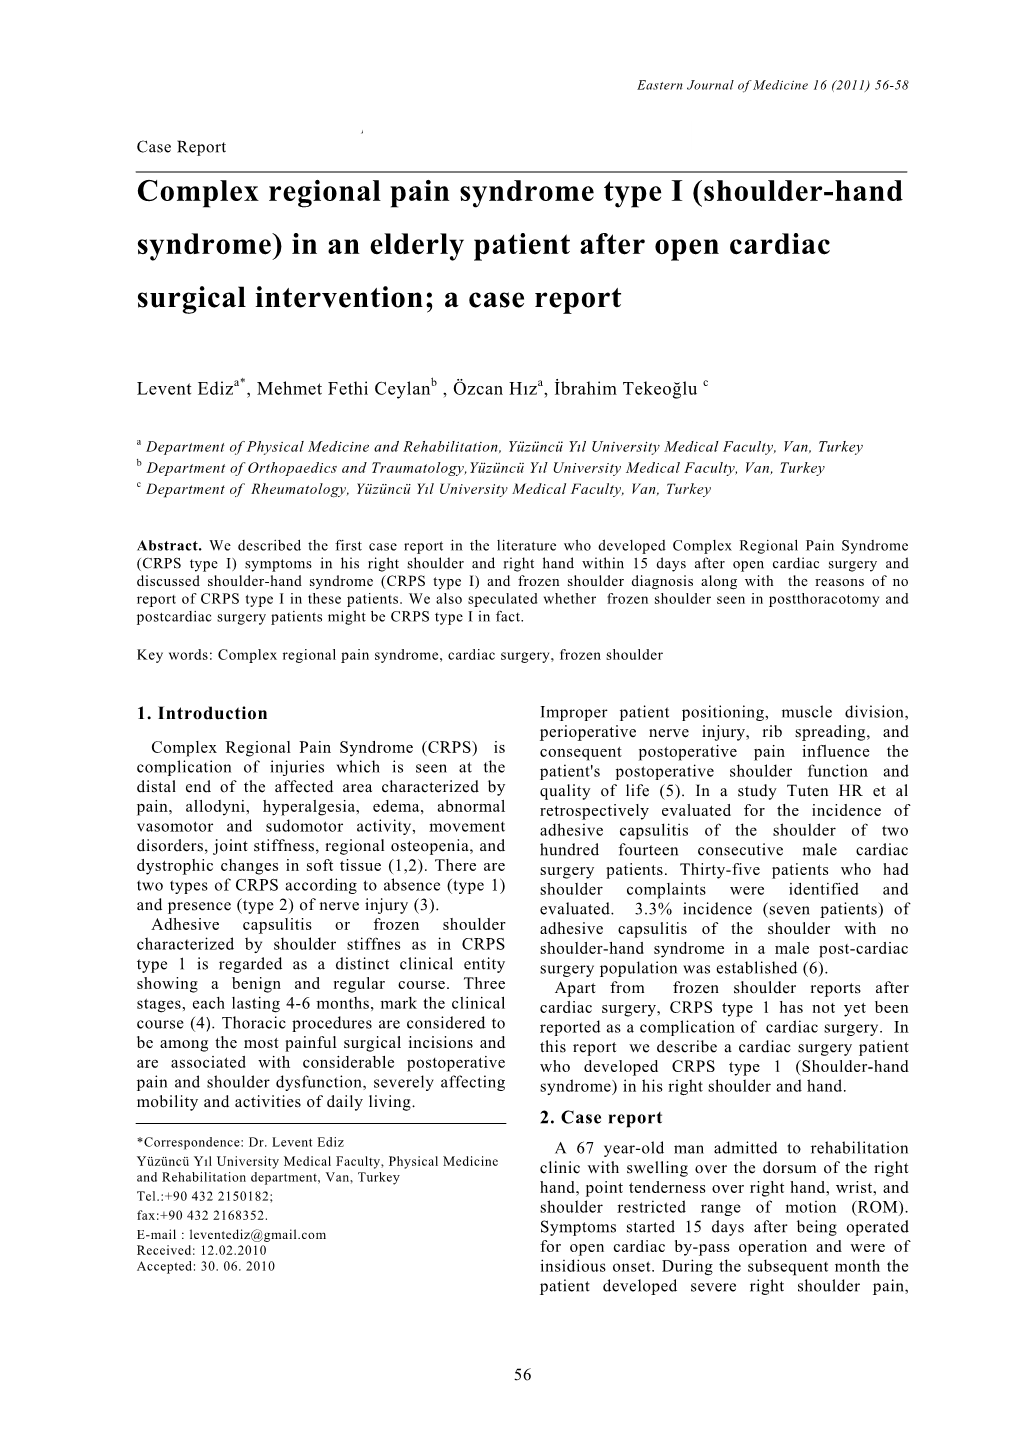 Complex Regional Pain Syndrome Type I (Shoulder-Hand Syndrome) in an Elderly Patient After Open Cardiac Surgical Intervention; a Case Report